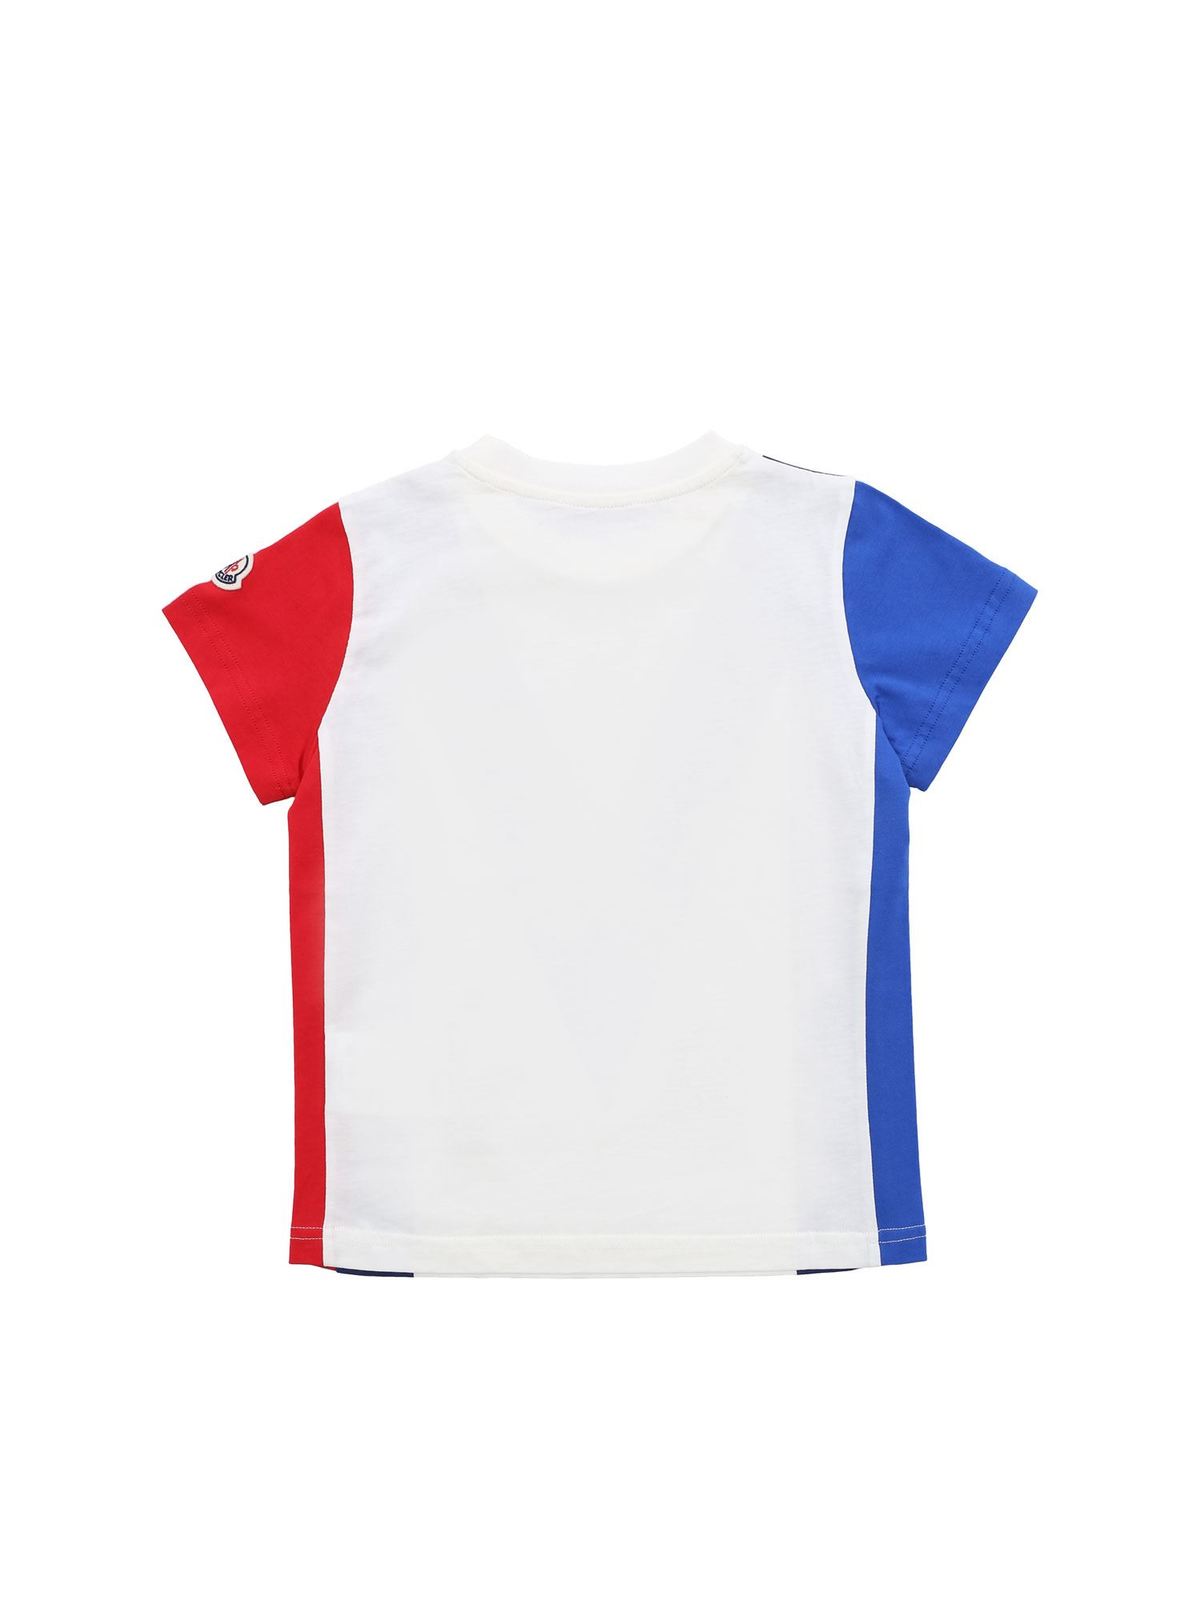 Logo patch T-shirt in blue red and ivory